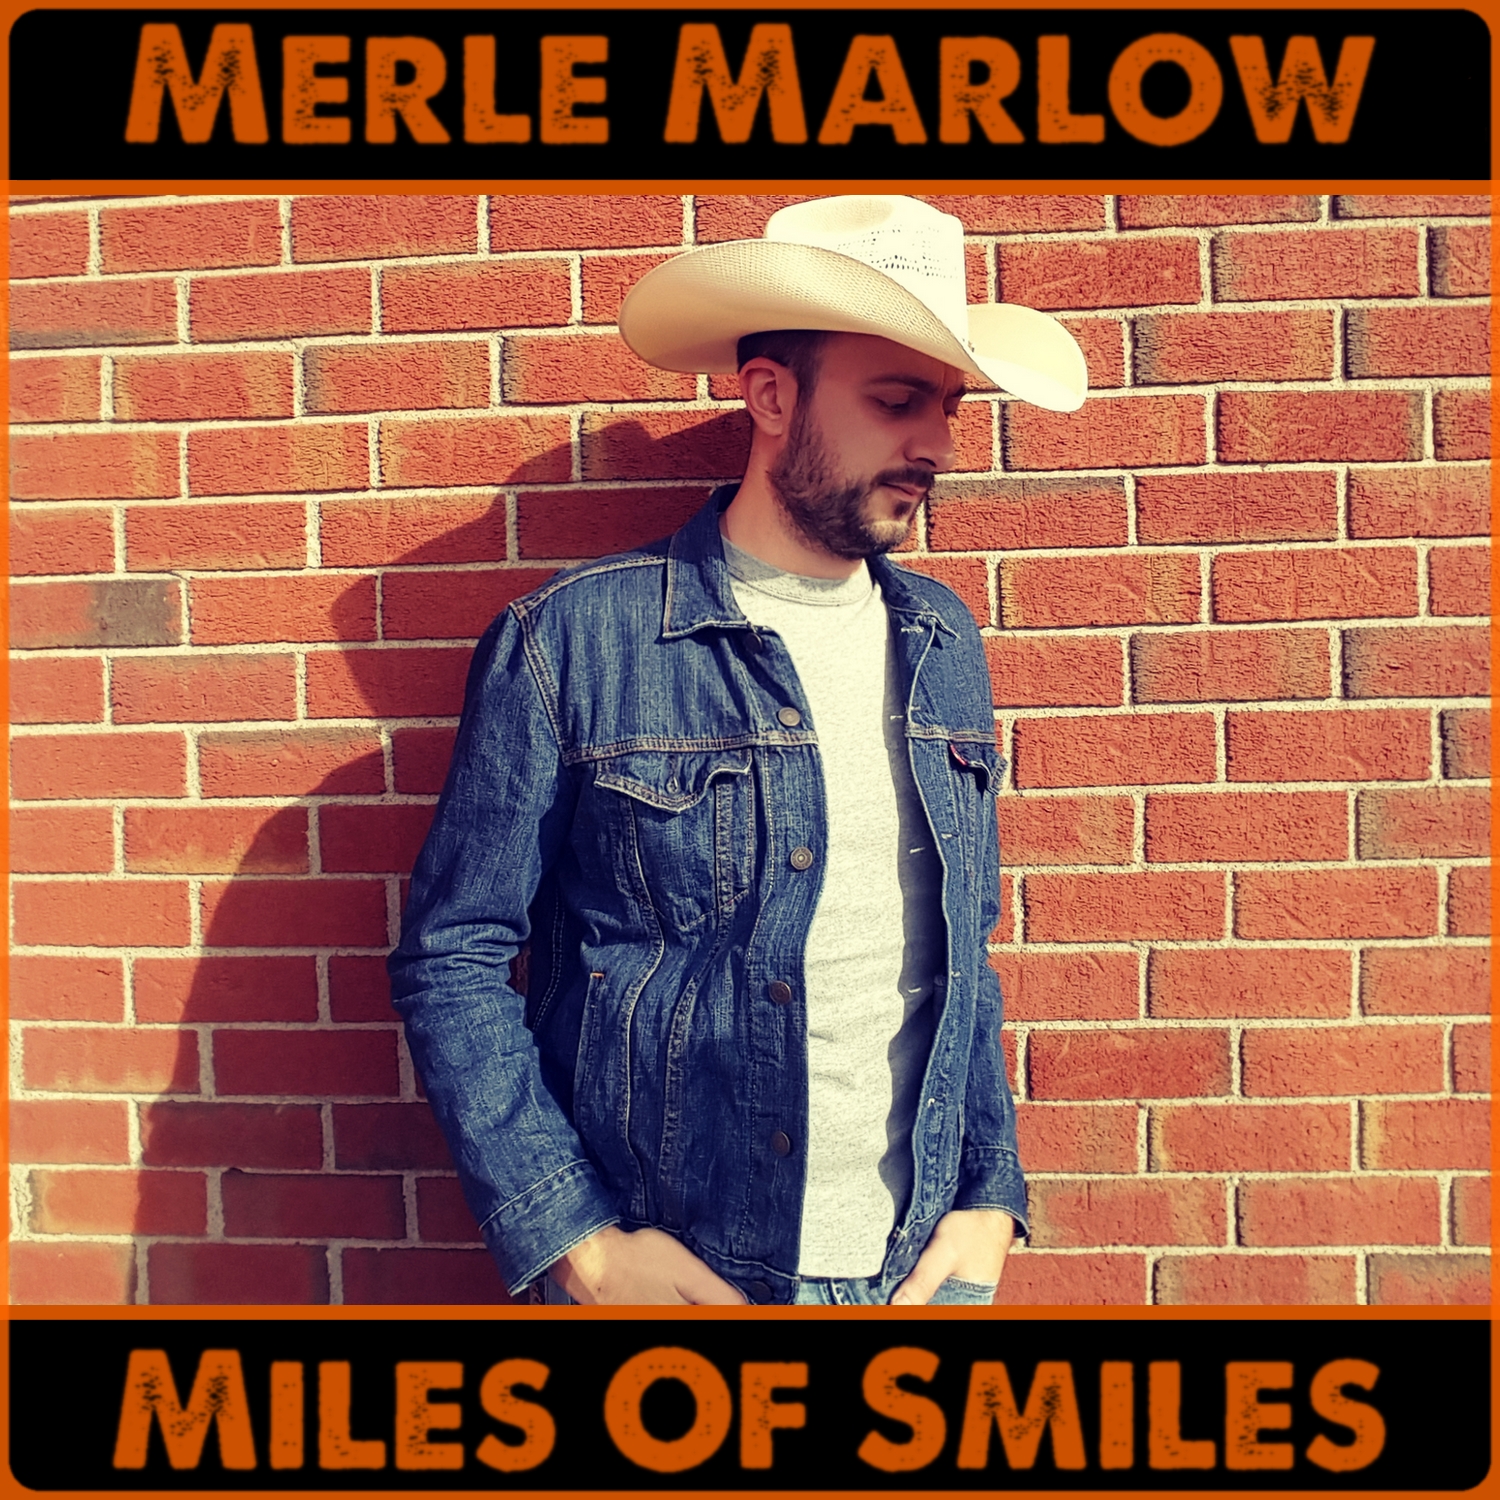 Art for Miles Of Smiles by Merle Marlow